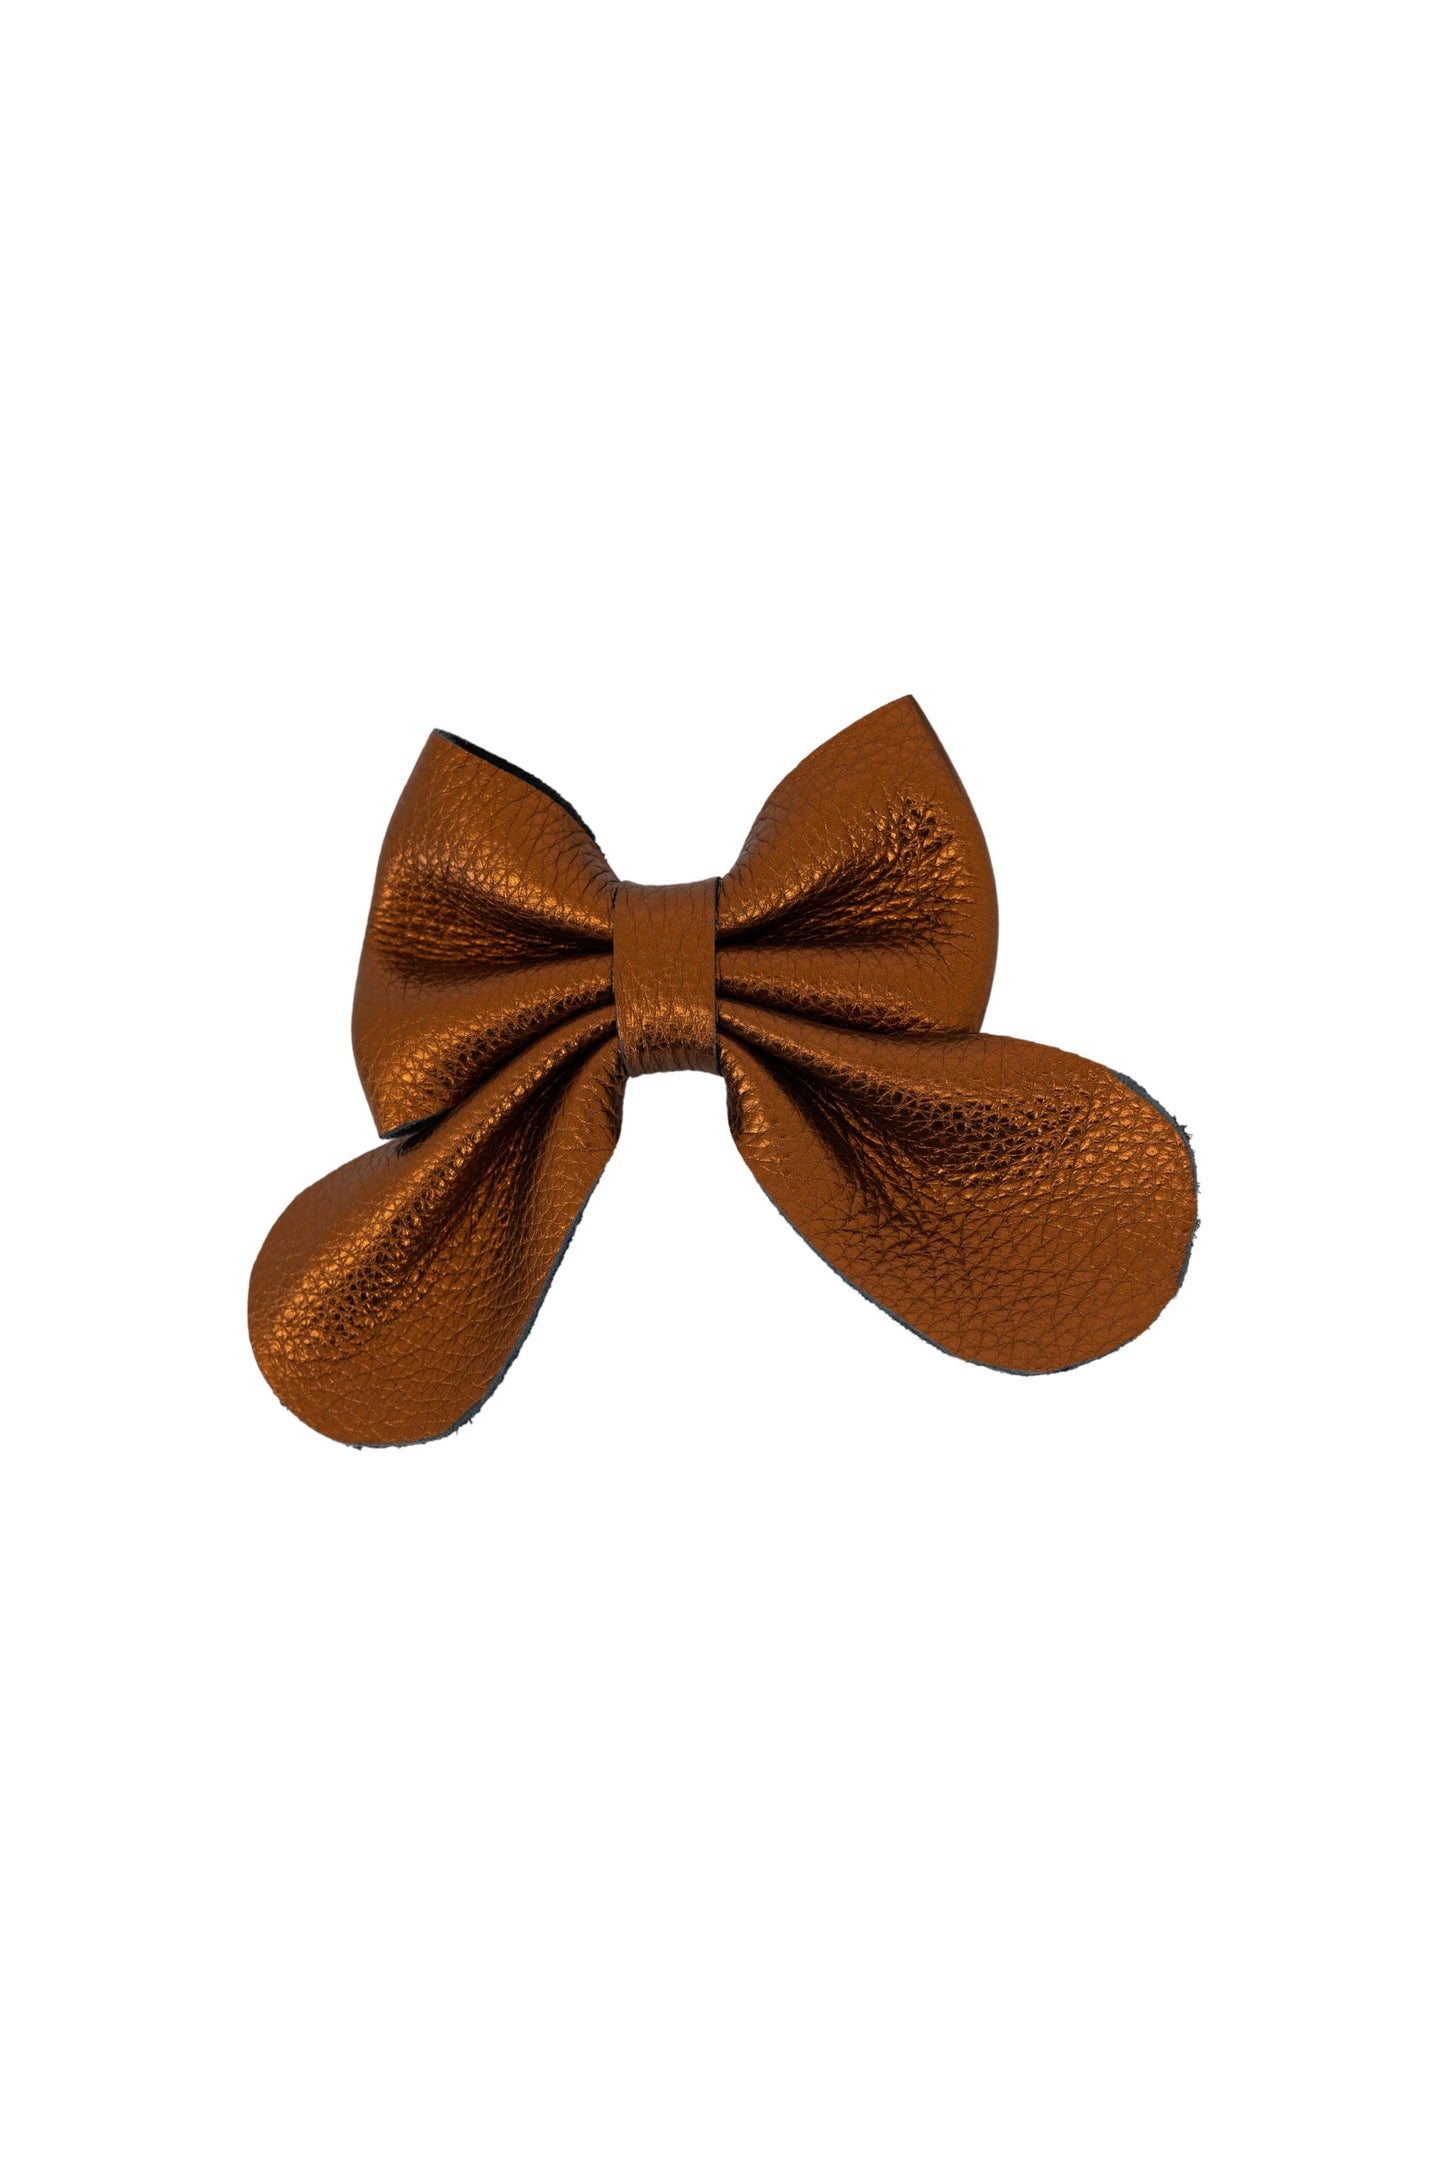 Leather dog bow - Limited edition